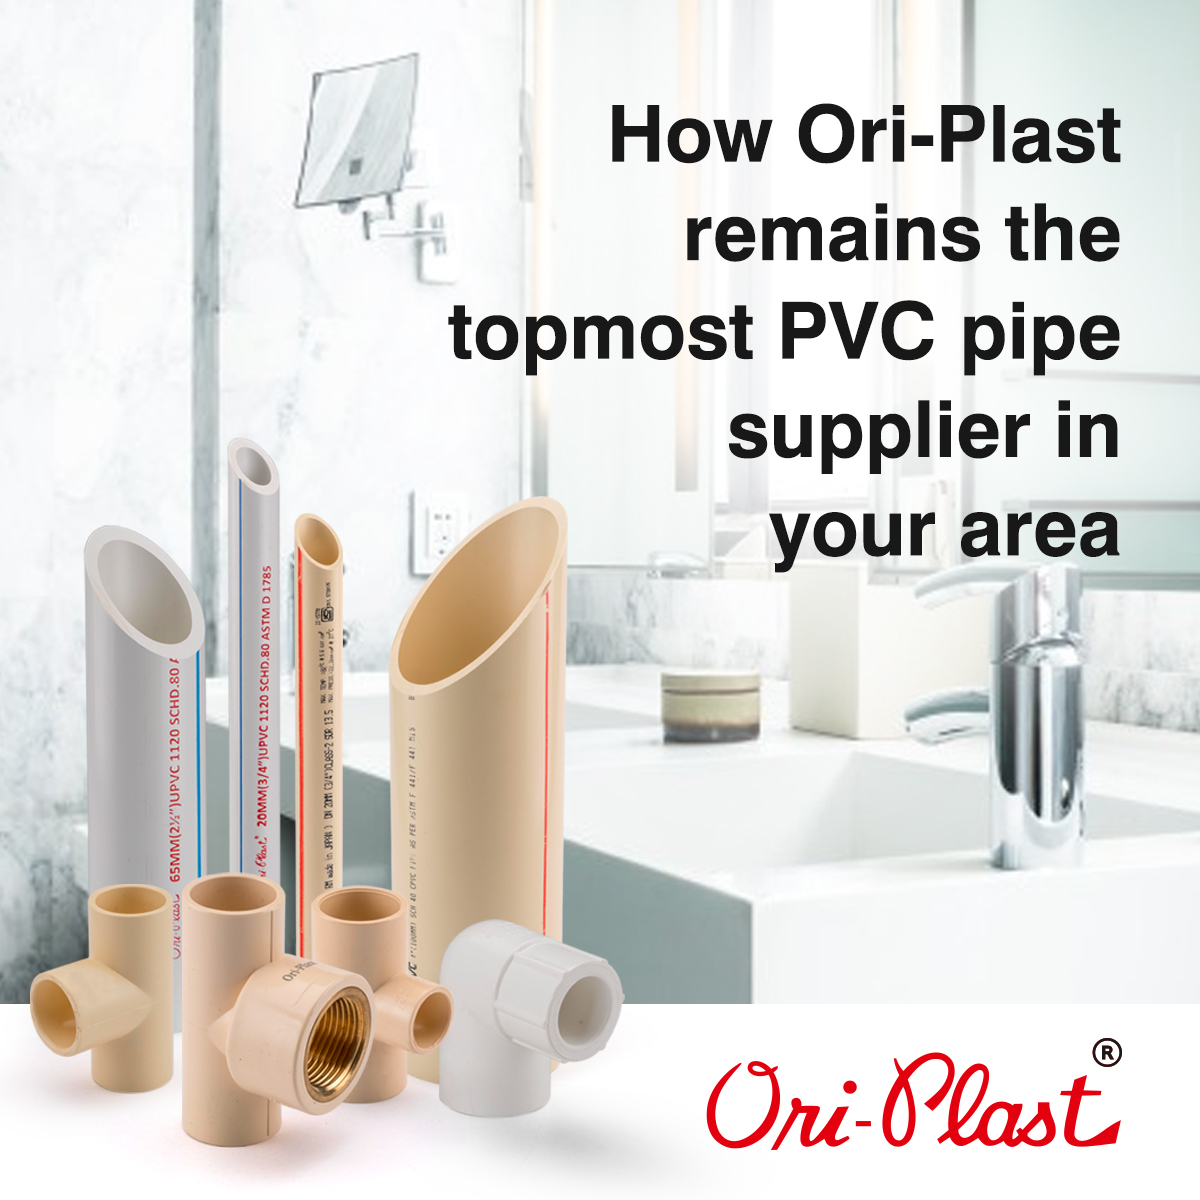 Ori-Plast Always Remains at Top Among the PVC Pipe Suppliers in Your Area